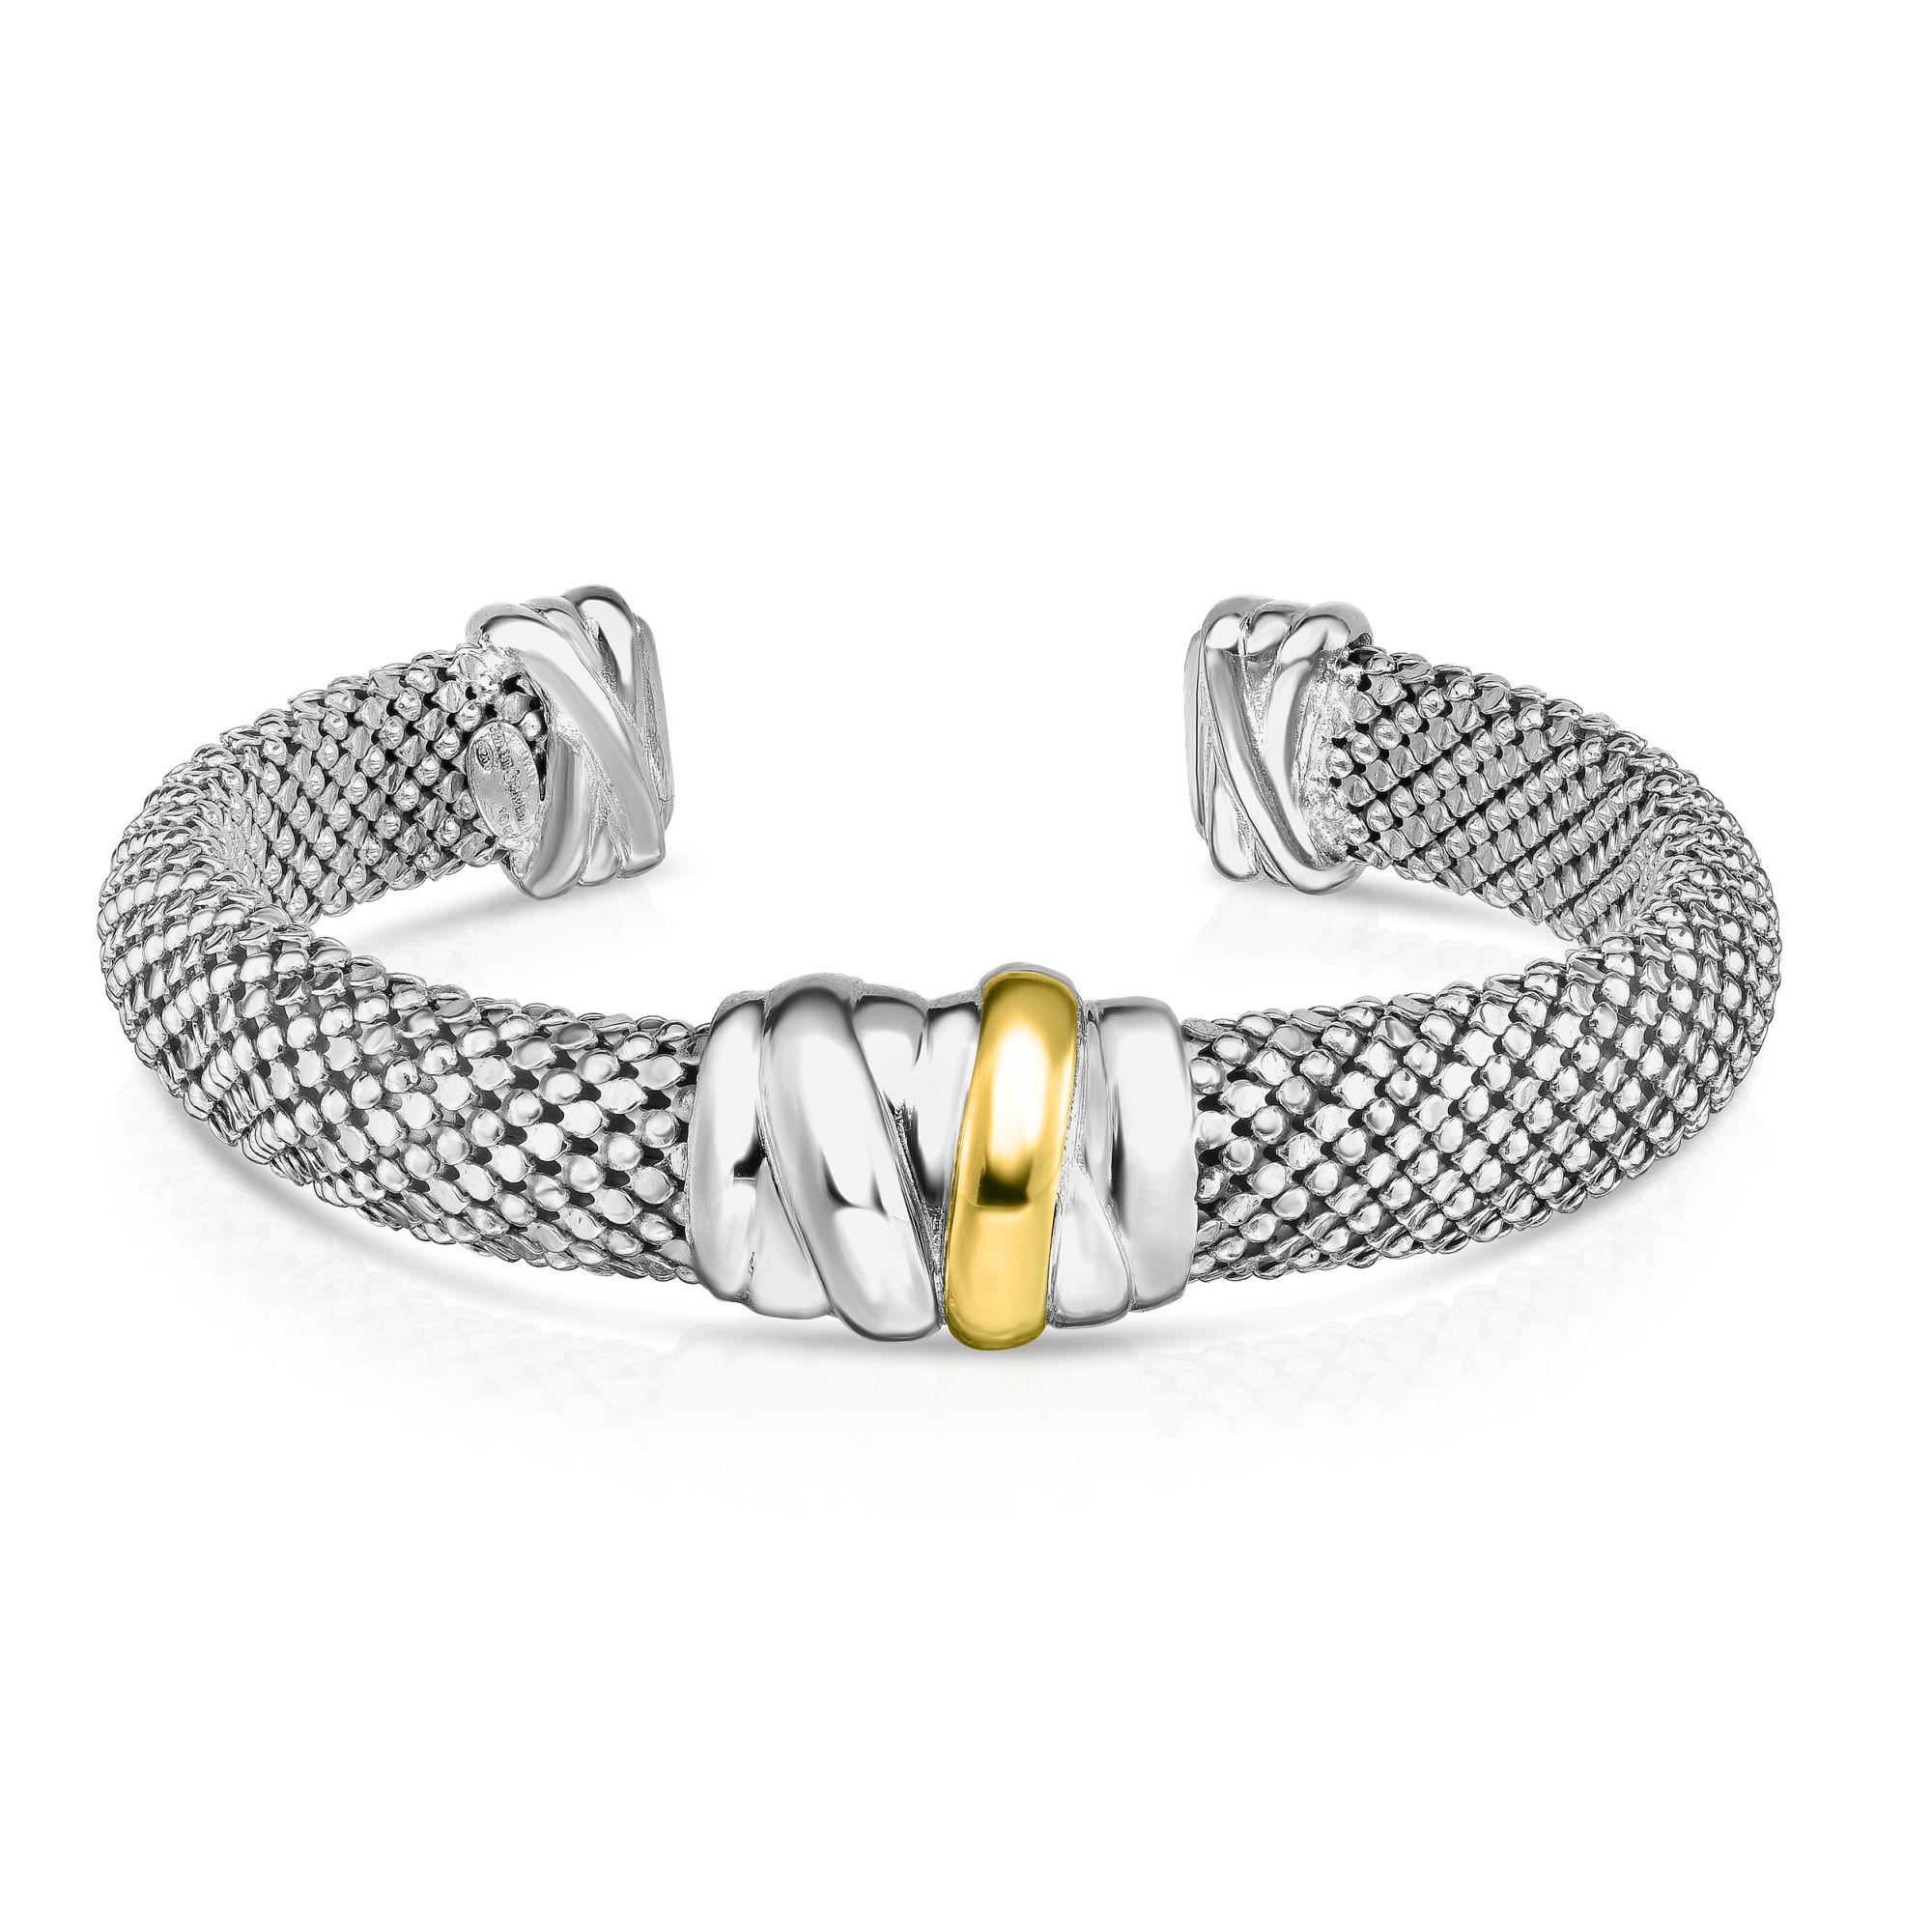 Popcorn Texture Bracelet with Hook Clasp and Diamonds in Sterling Silver